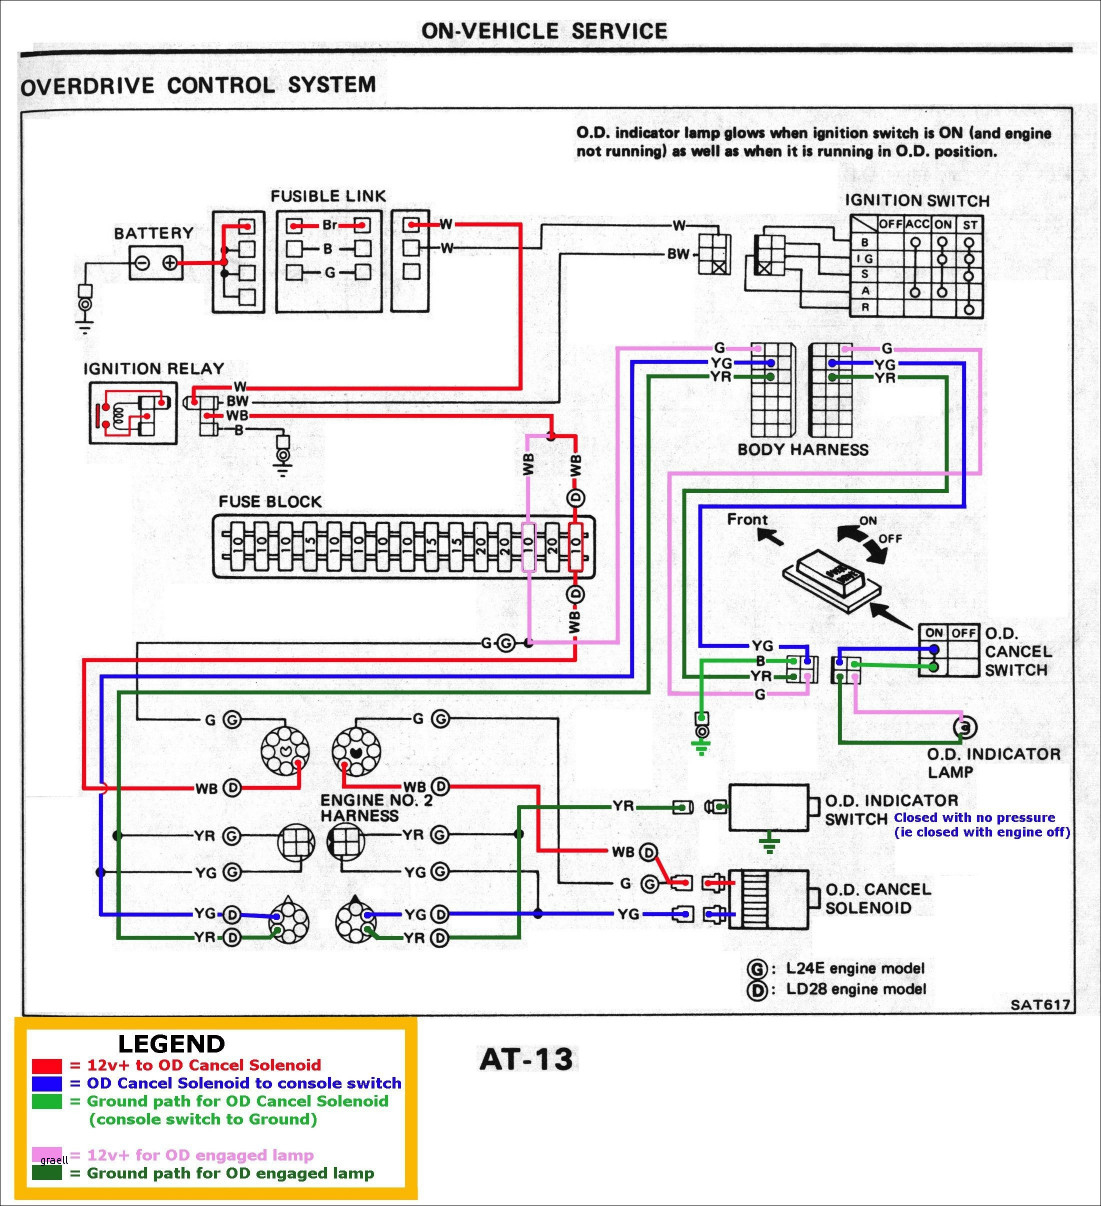 28 Awesome Fluorescent Tube Ballast Photograph - Ballast Wiring Diagram